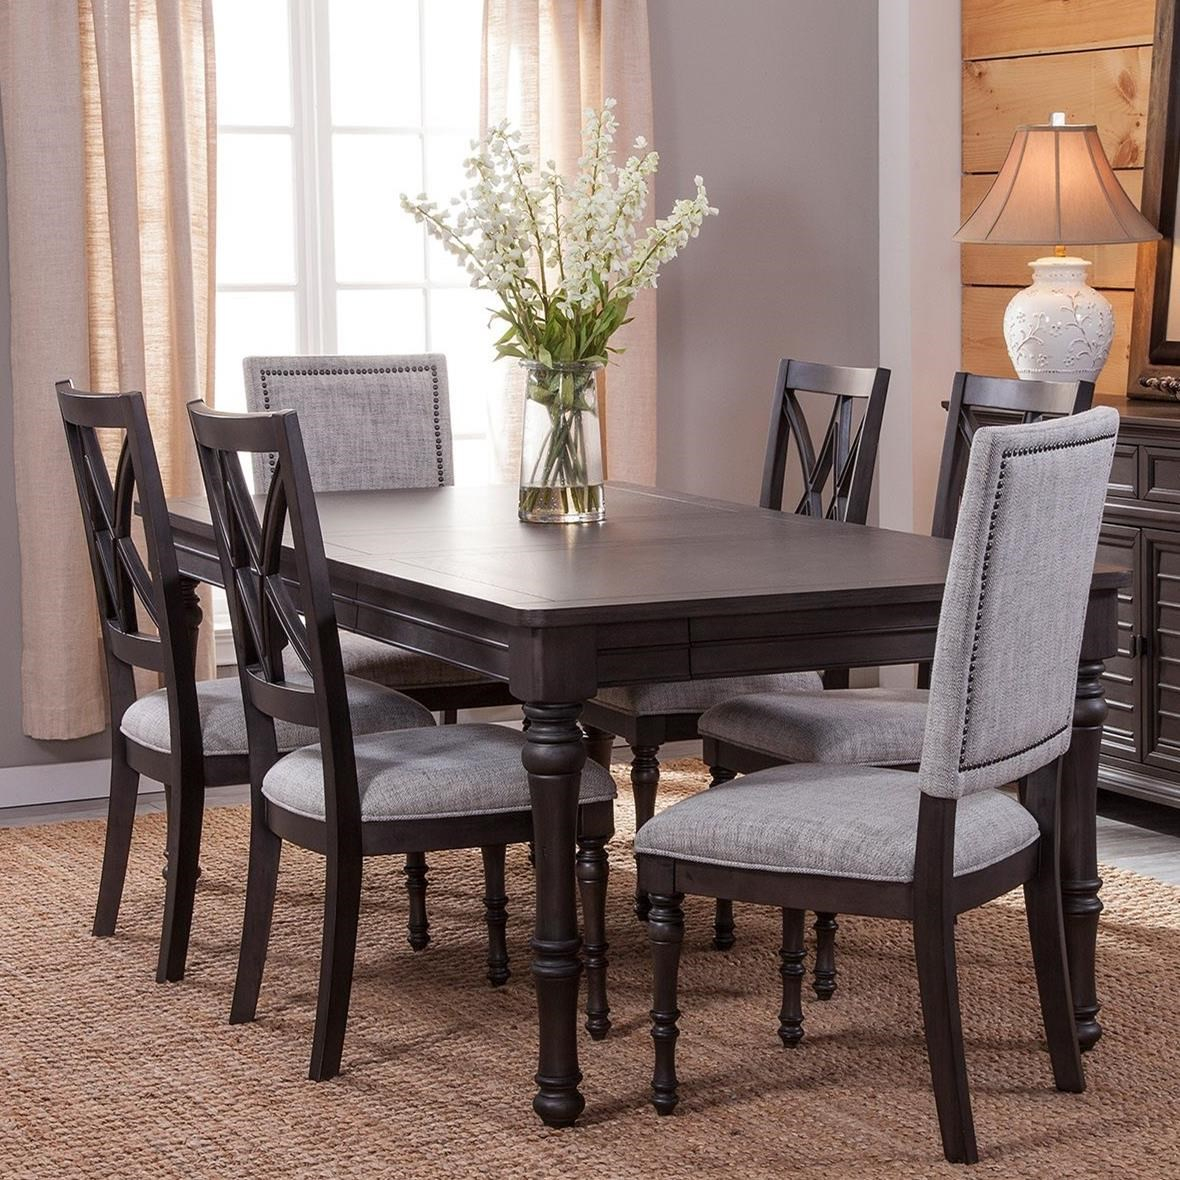 Linnett 7 Piece Dining Set with regard to dimensions 1180 X 1180